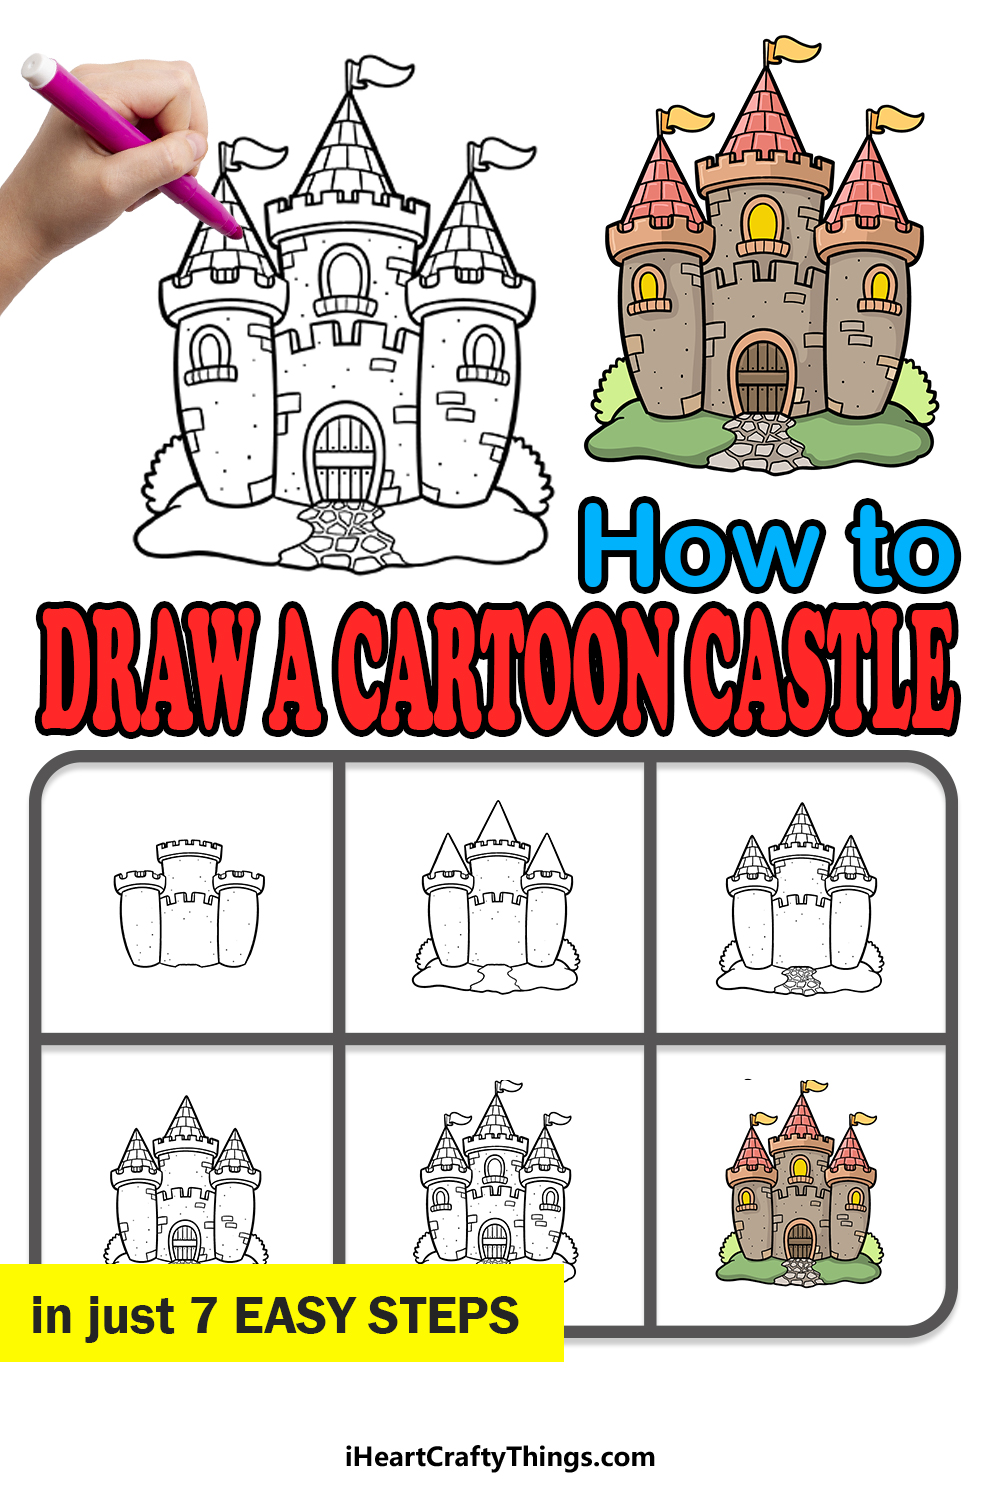 how to draw a cartoon castle in 7 easy steps